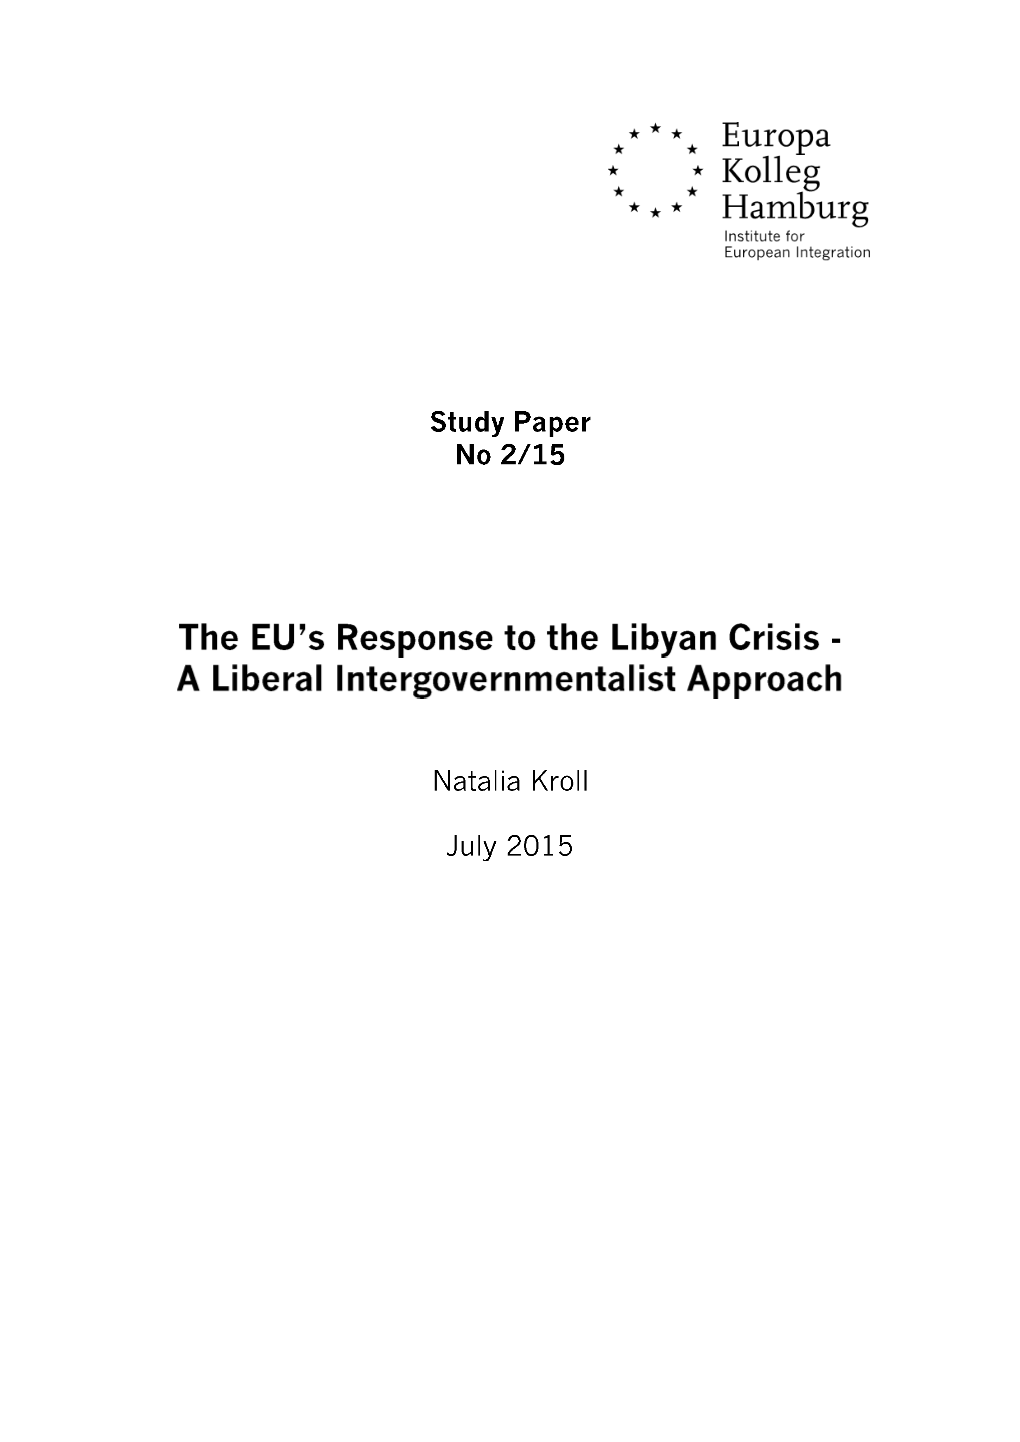 The EU's Response to the Libyan Crisis: a Liberal Intergovernment Approach